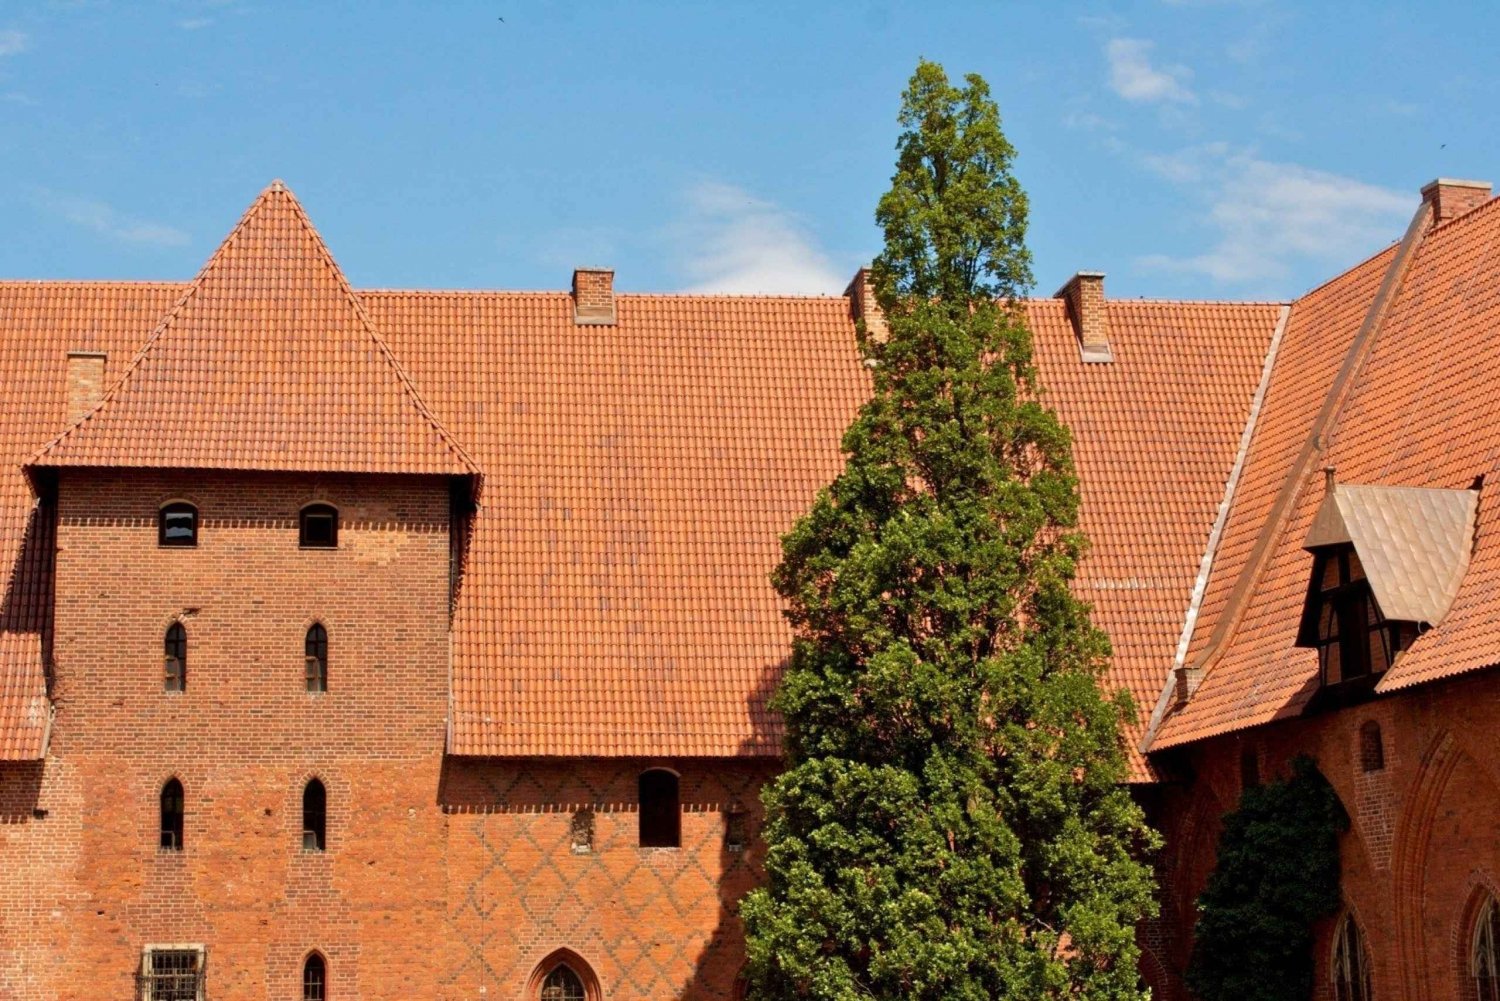 Warsaw: Castle of the Teutonic Oder in Malbork Full Day Tour